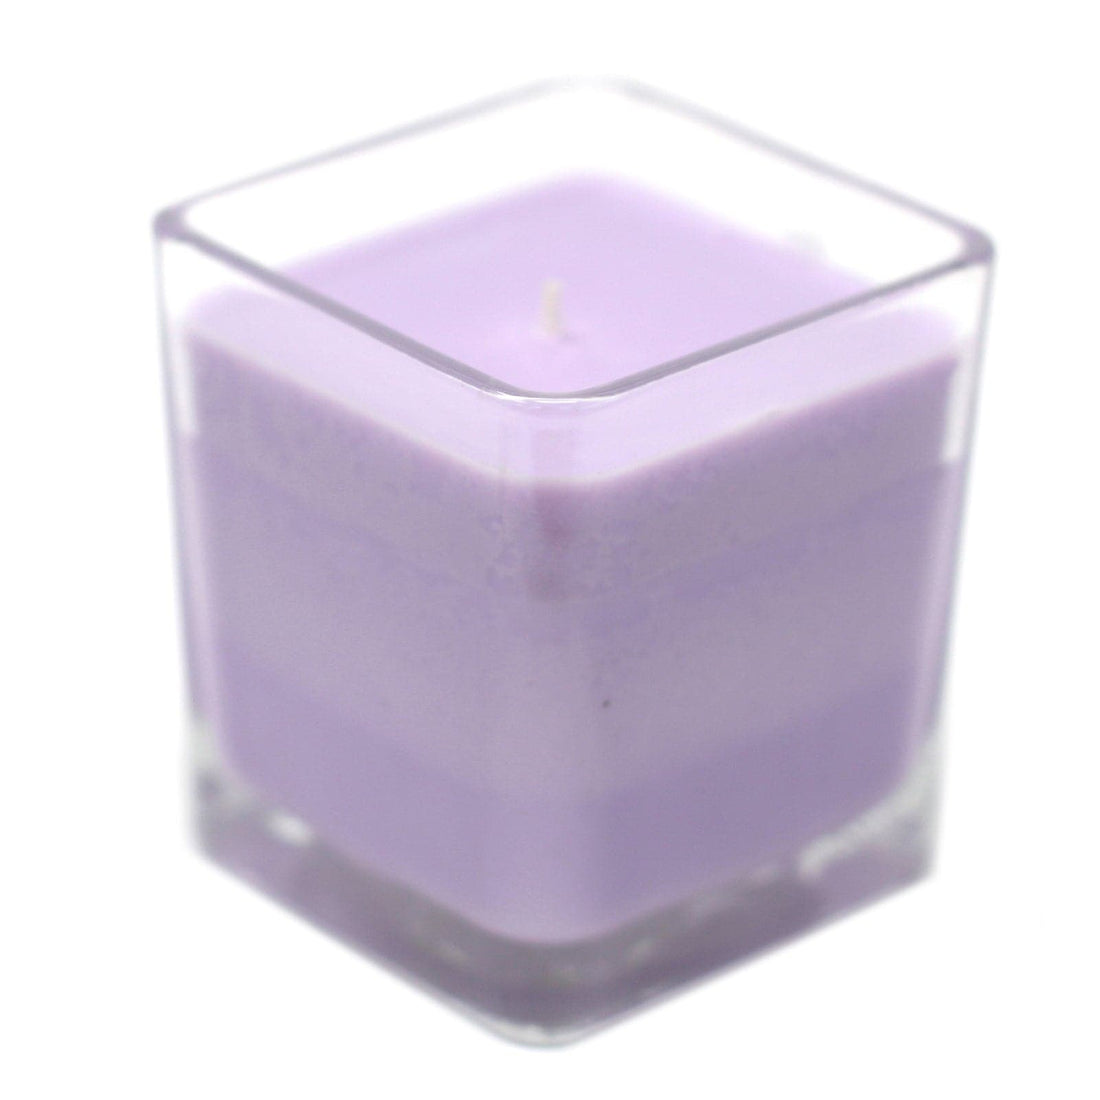 White Label Soy Wax Jar Candle - Lavender & Basil - best price from Maltashopper.com WLSOYC-01